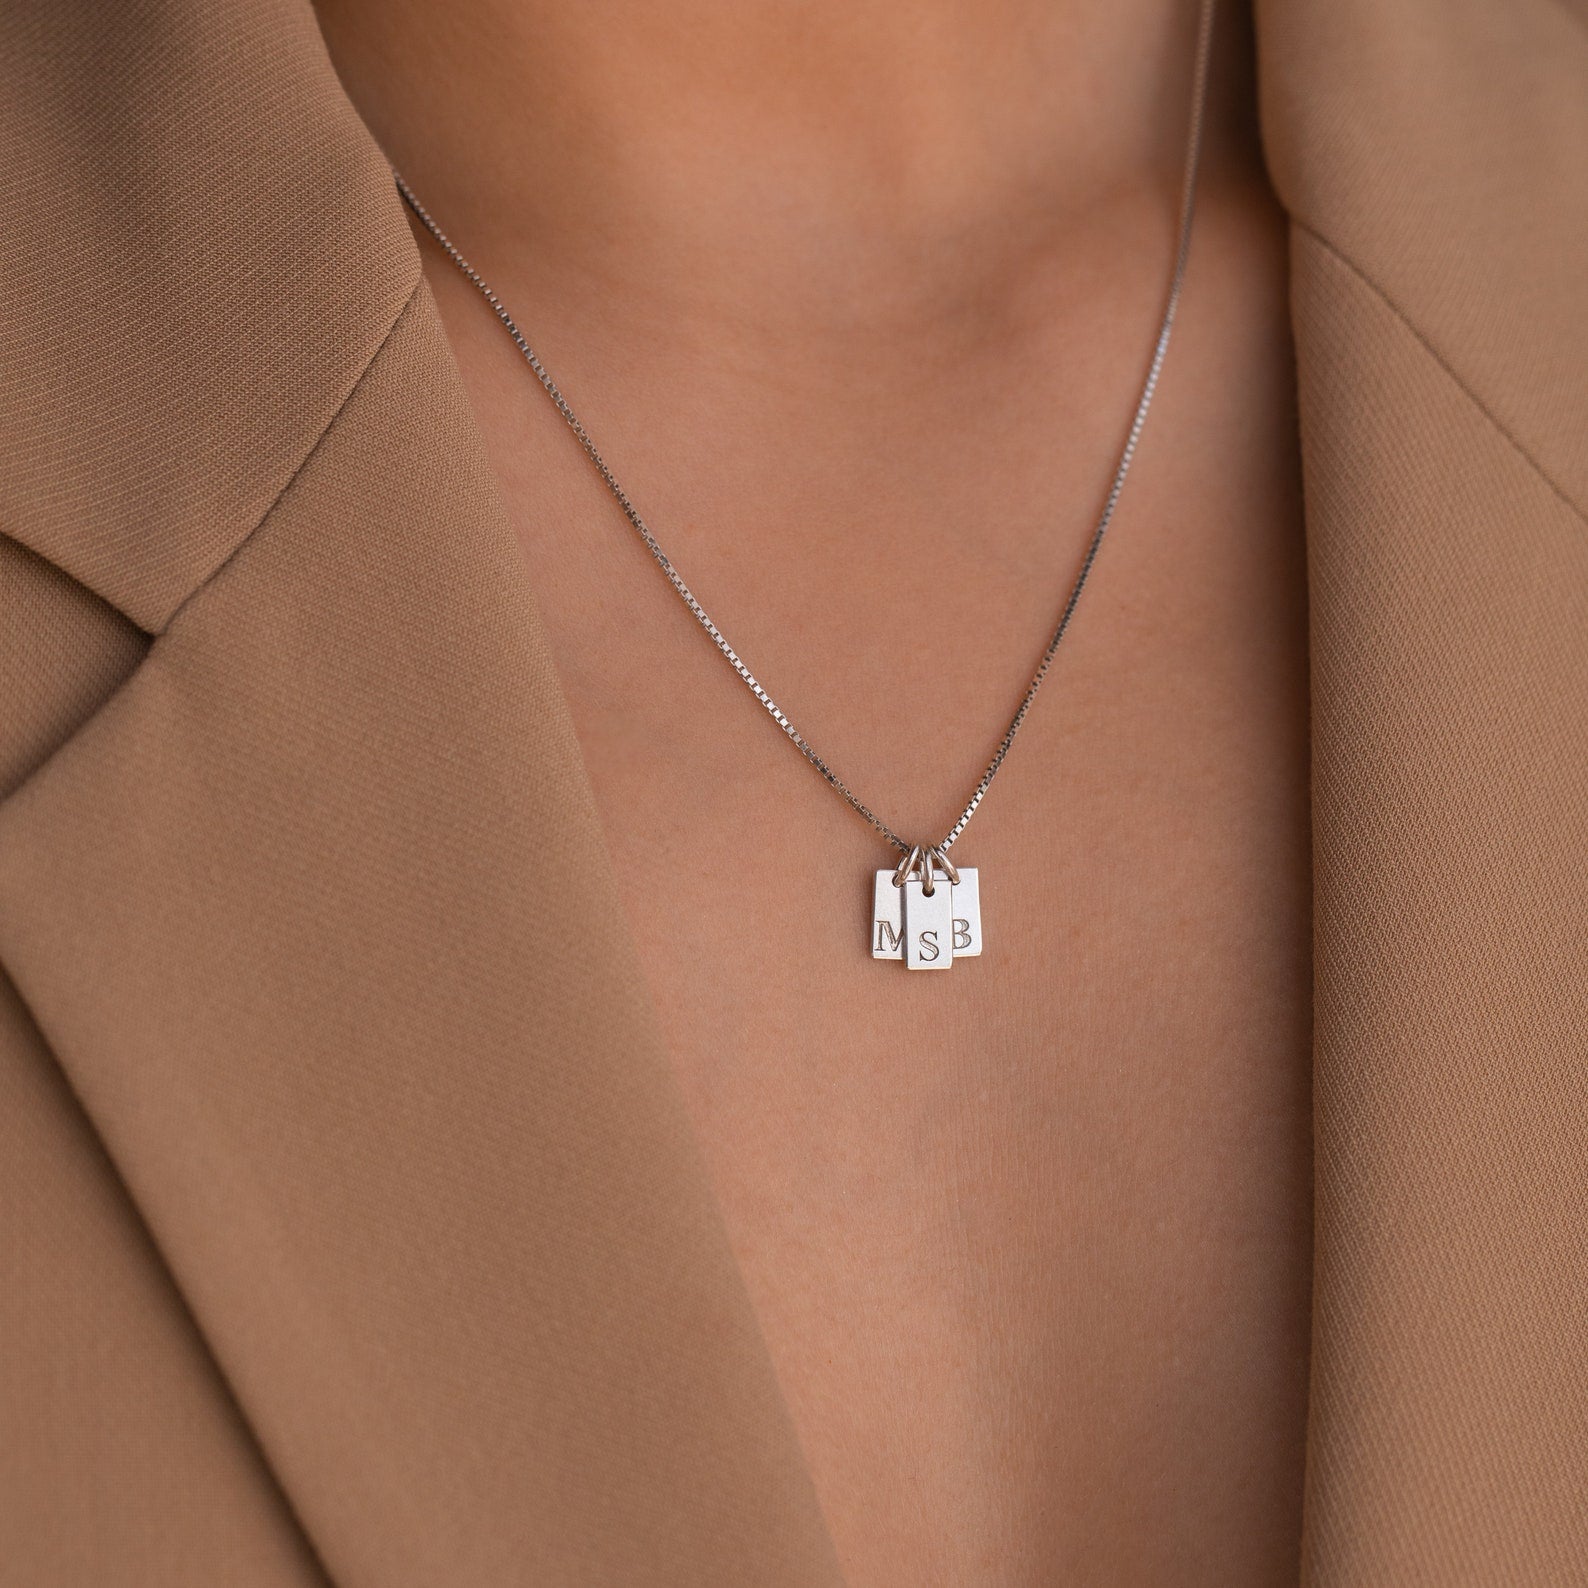 Custom Initial Necklace Block Initial Charm Necklace Bold Curb Chain  Necklace Personalized Jewelry Gift for Her IZZY NECKLACE 